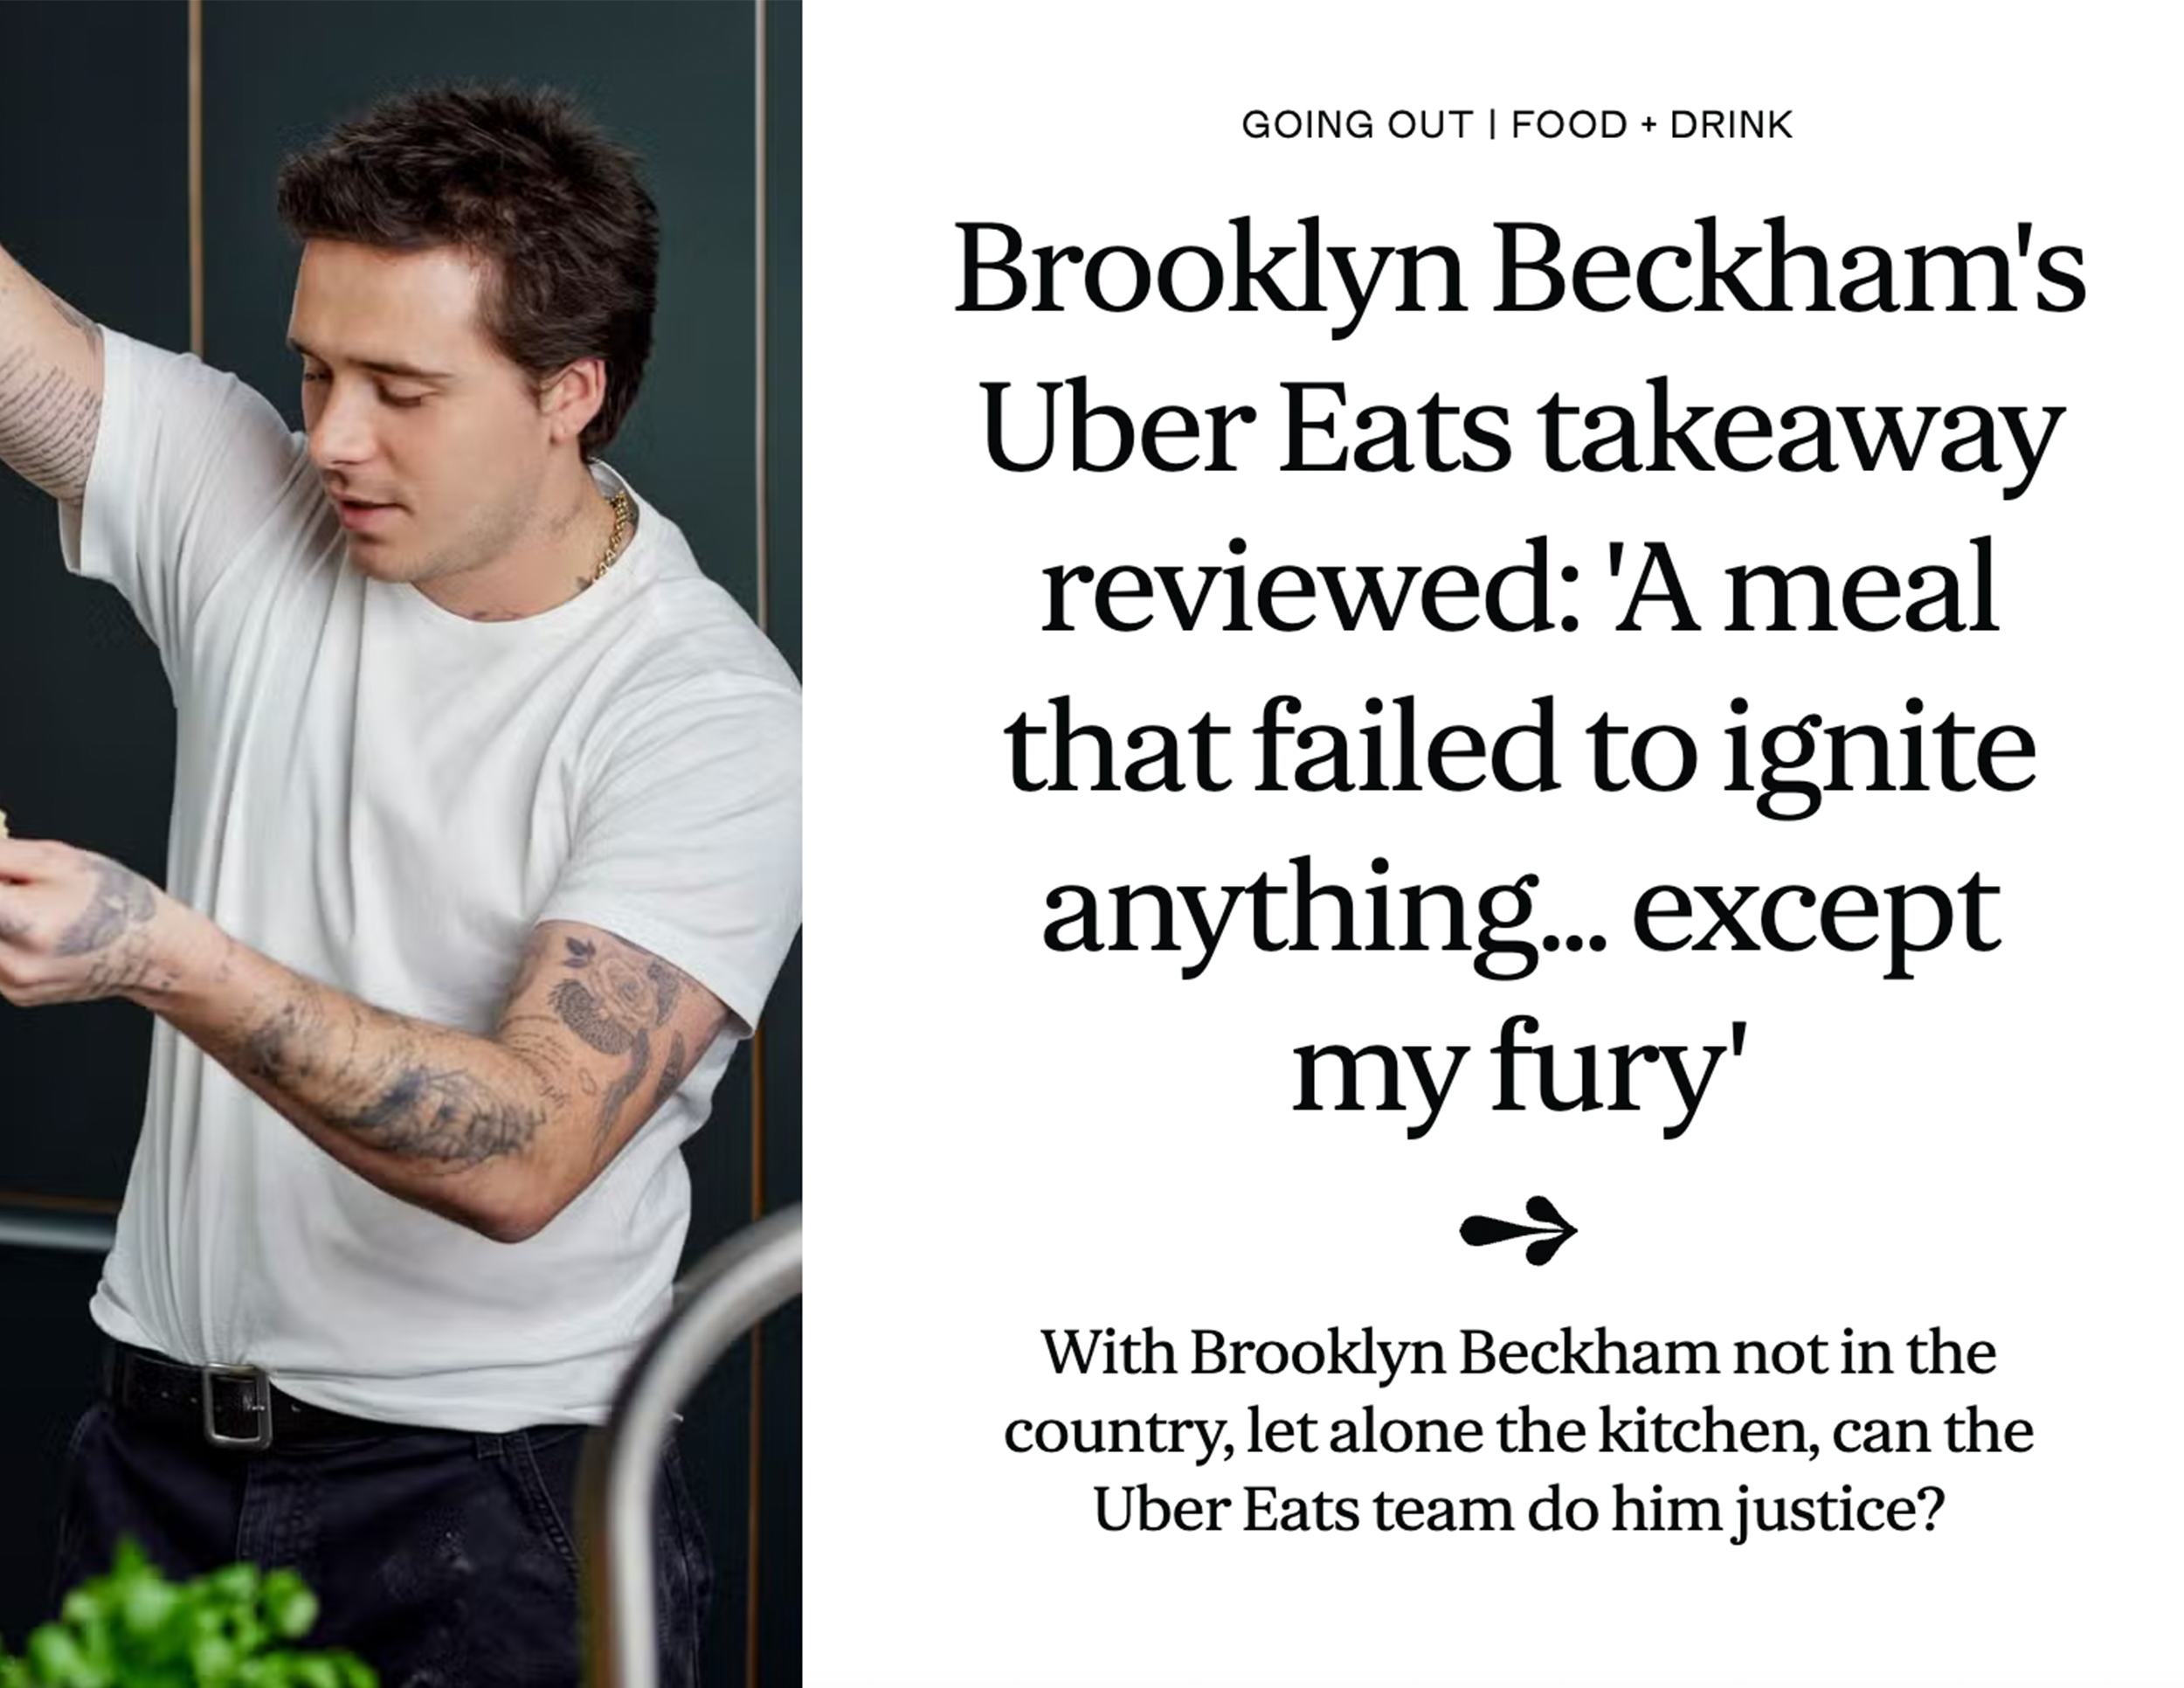 A screenshot of the headline and photo used in the Brooklyn Beckham food review on the Evening Standard online.